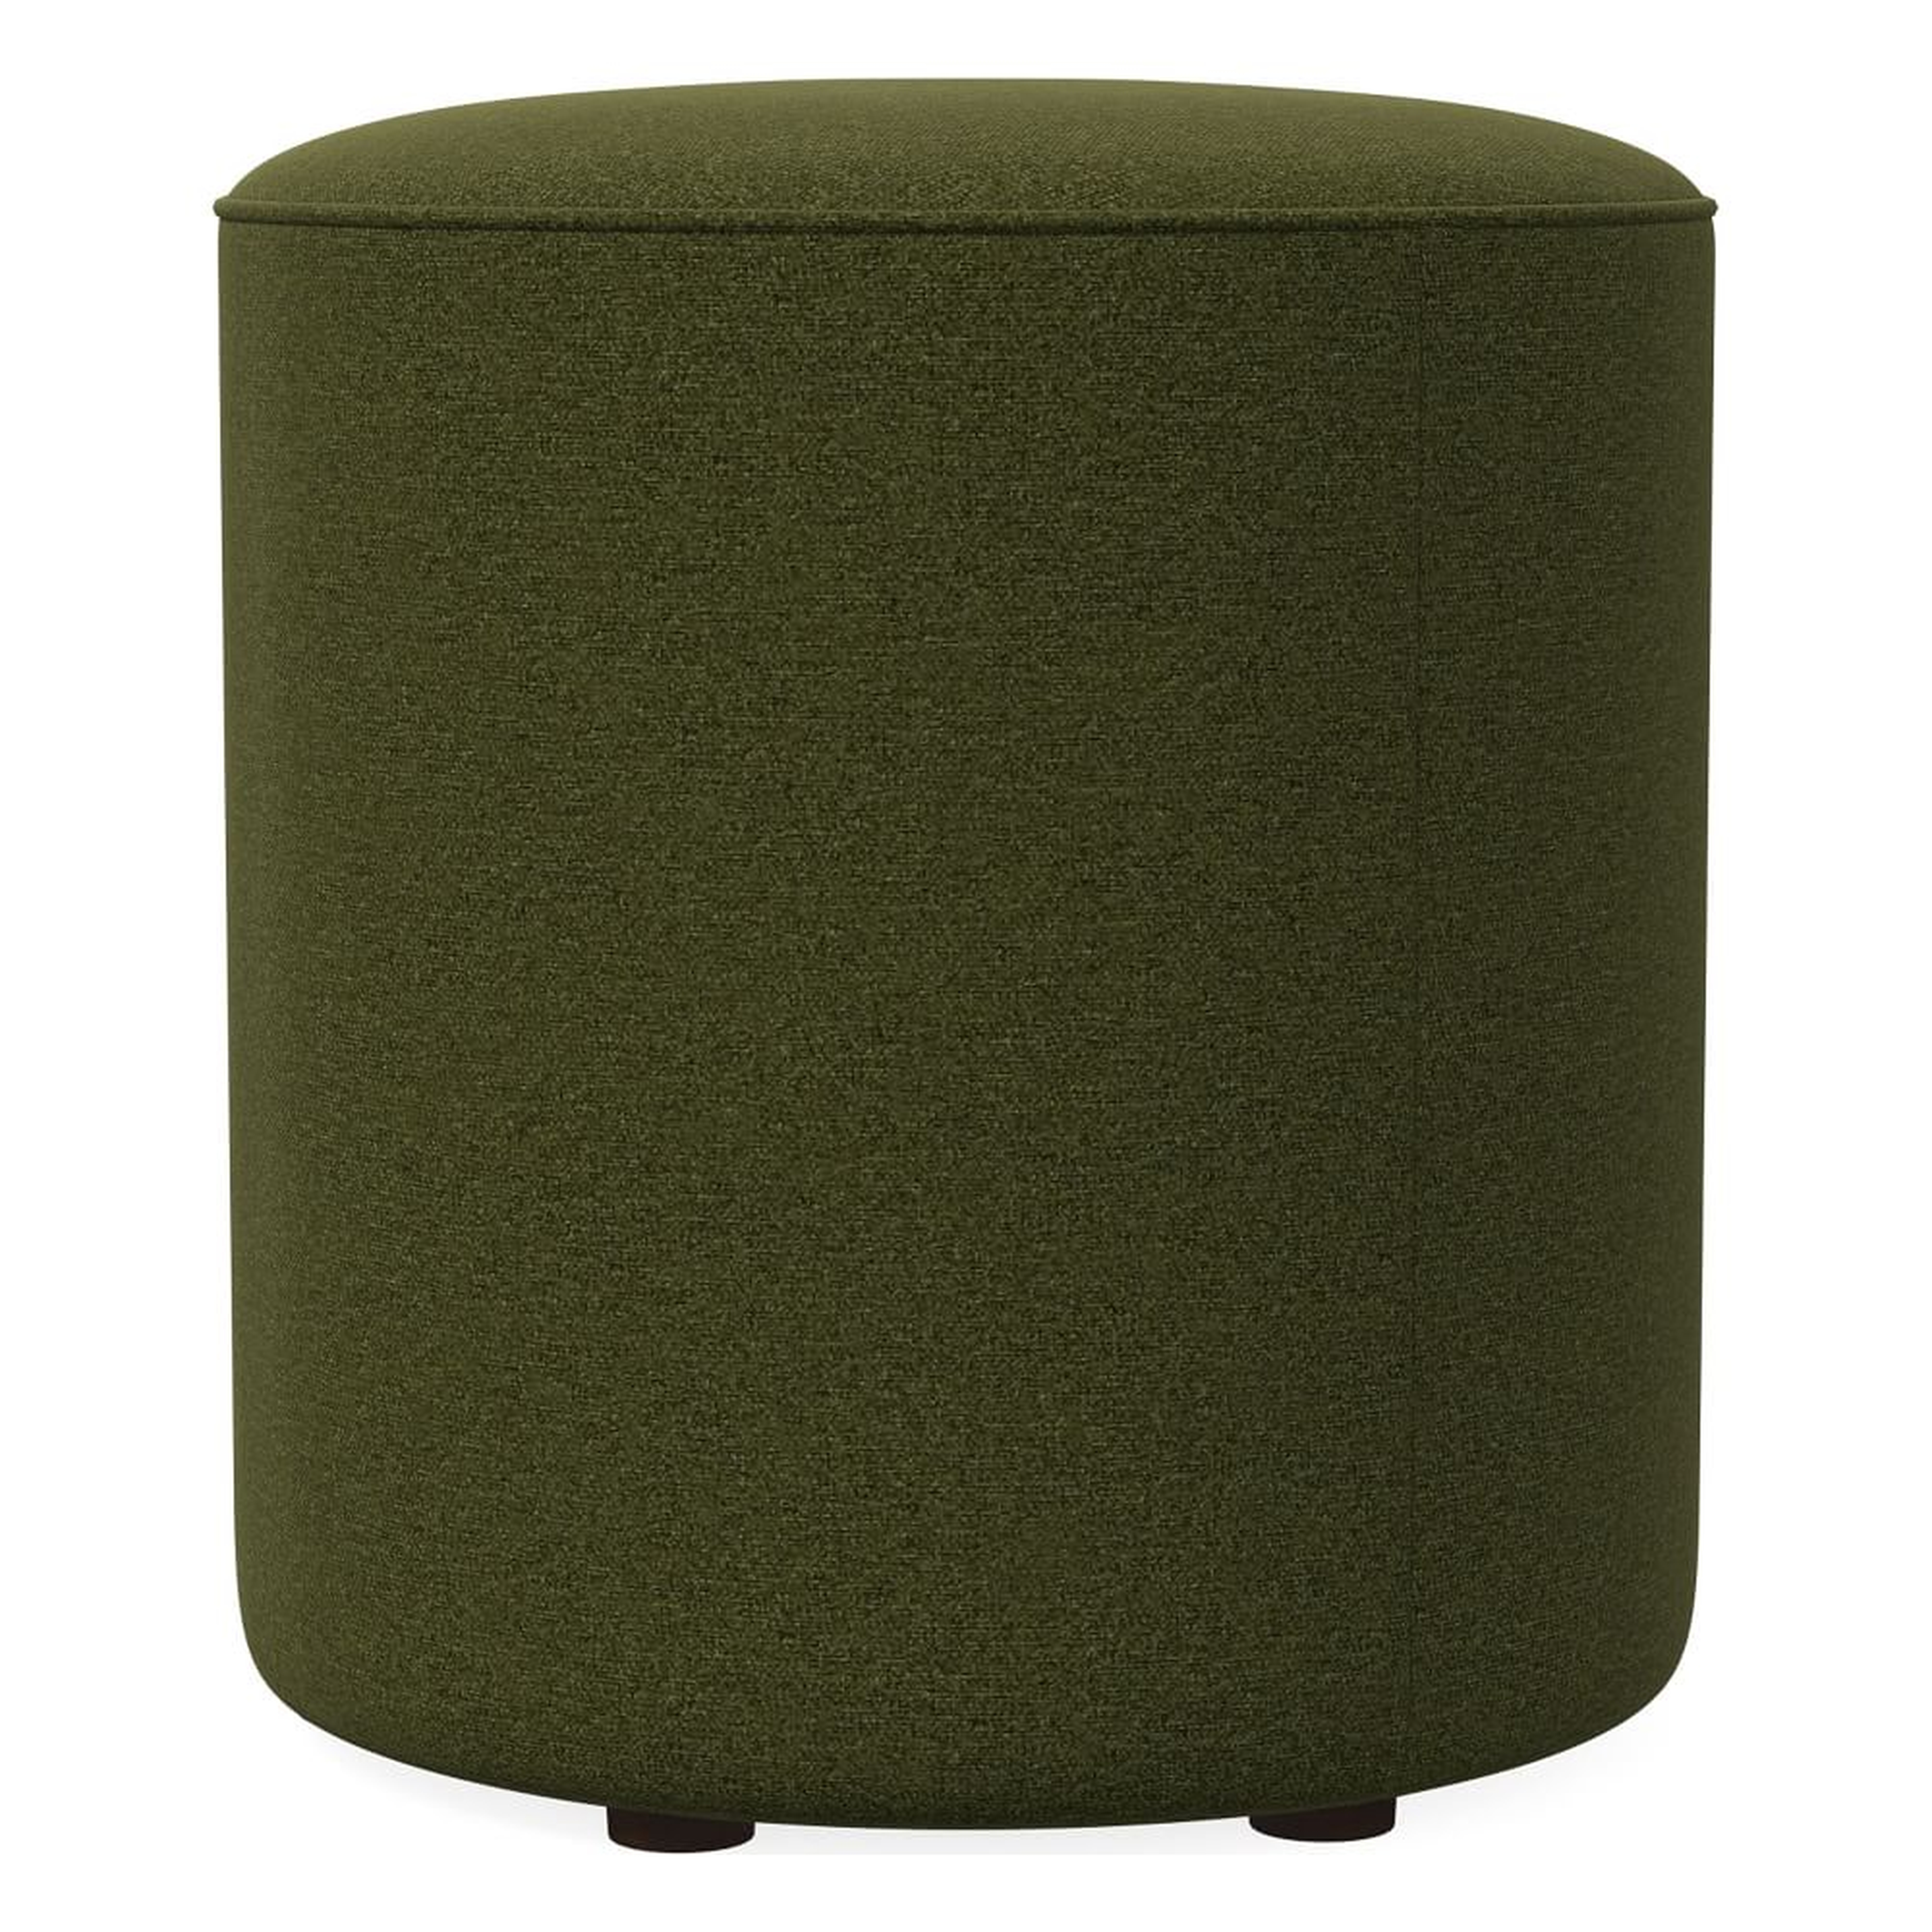 Isla Small Ottoman, Poly, Distressed Velvet, Tarragon, Concealed Supports - West Elm